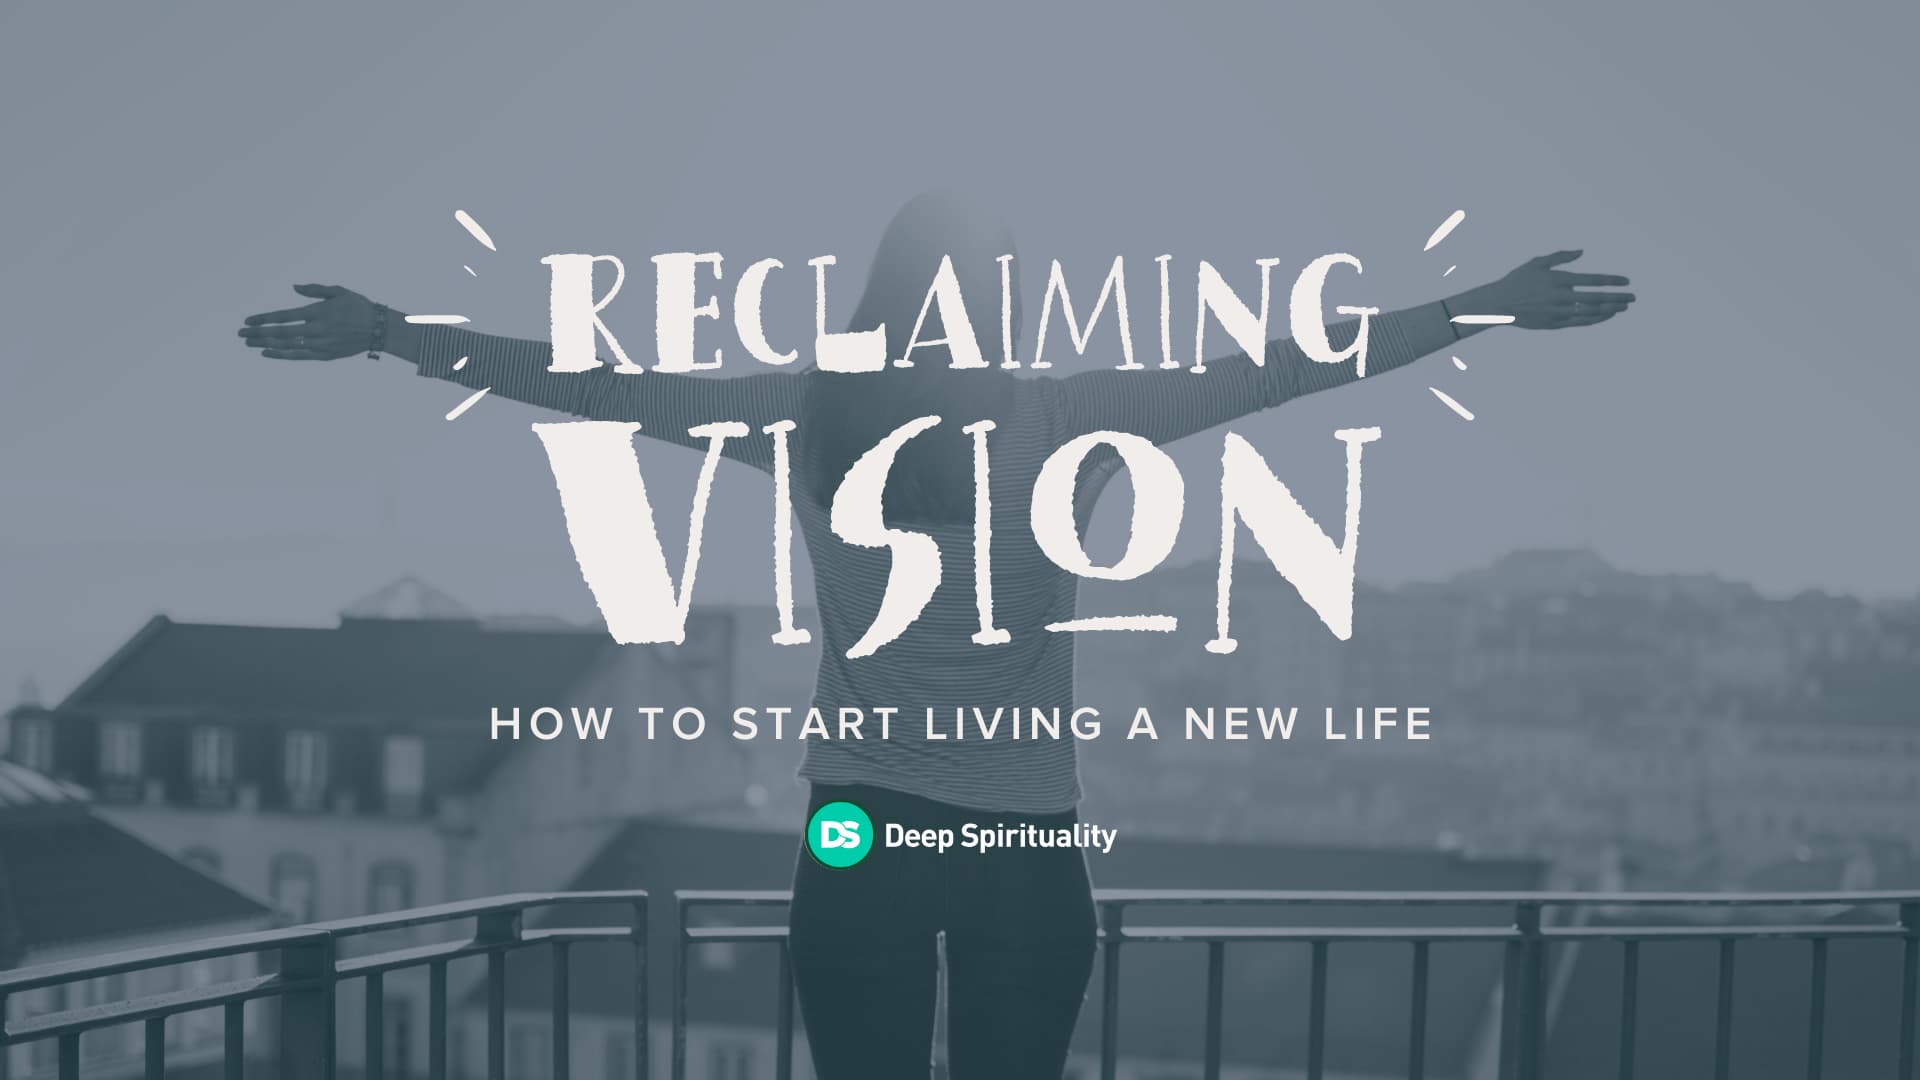 How to Start Living a New Life